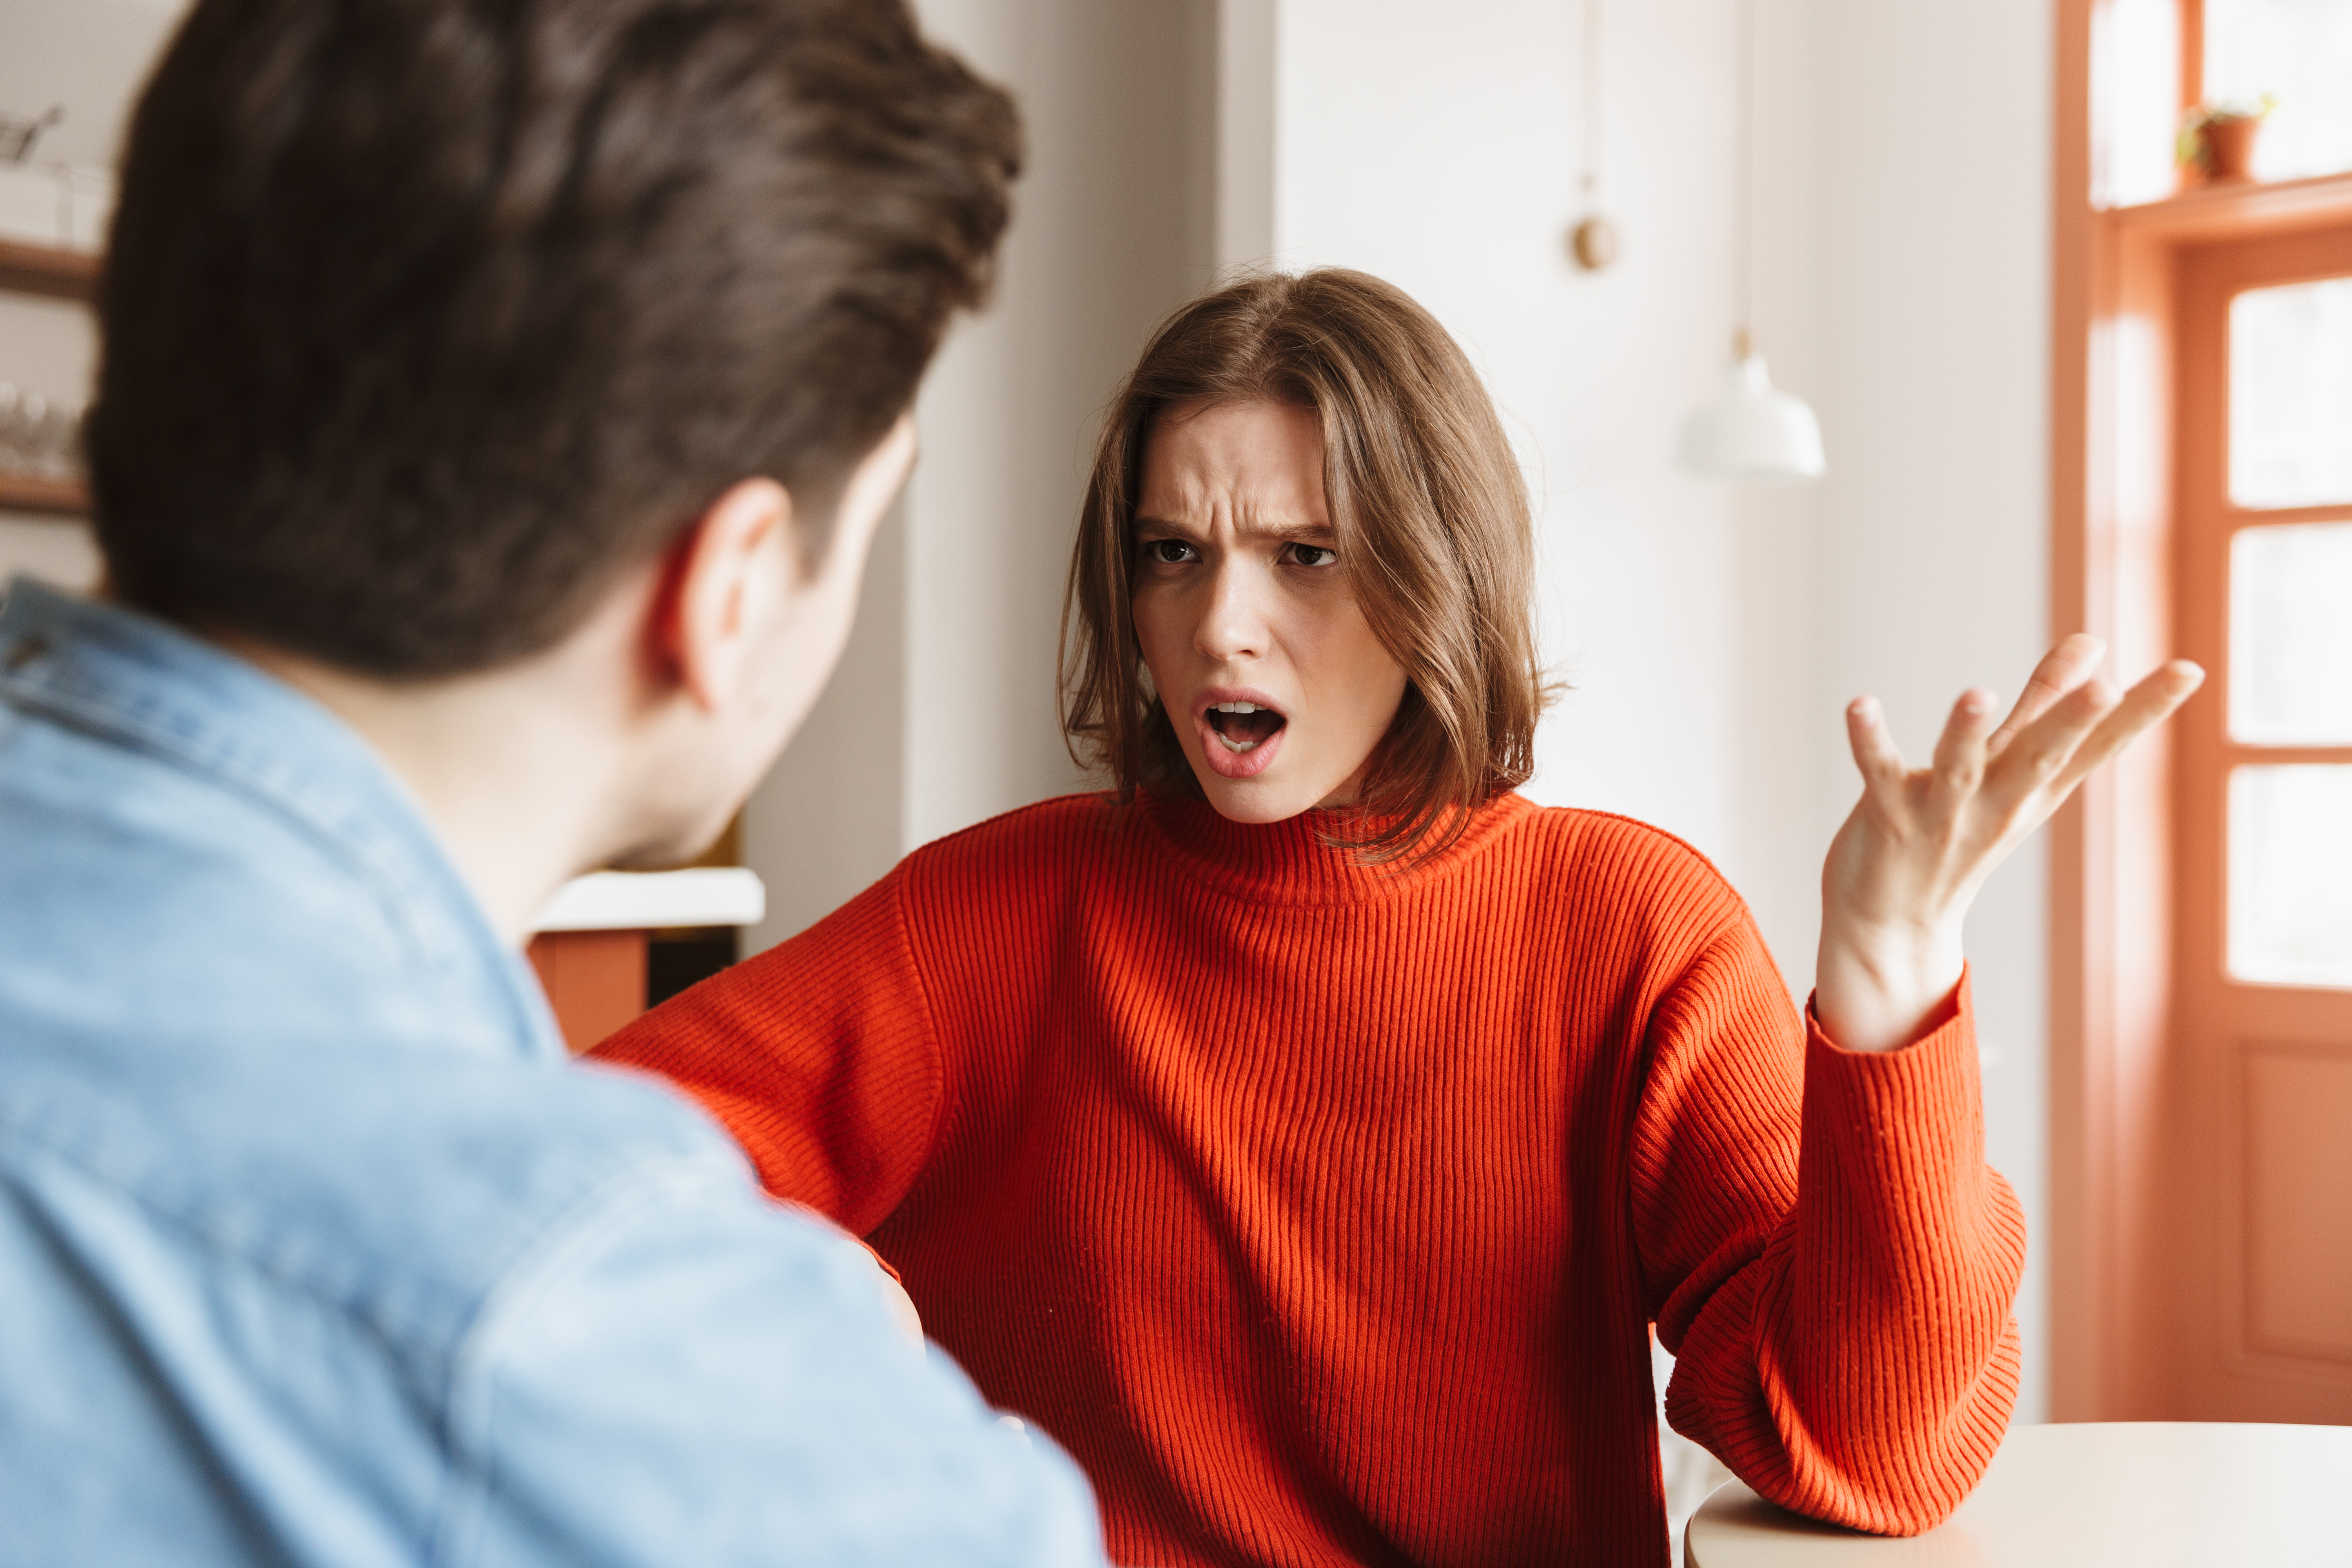 A woman becoming angry while arguing with her husband | Source: Getty Images